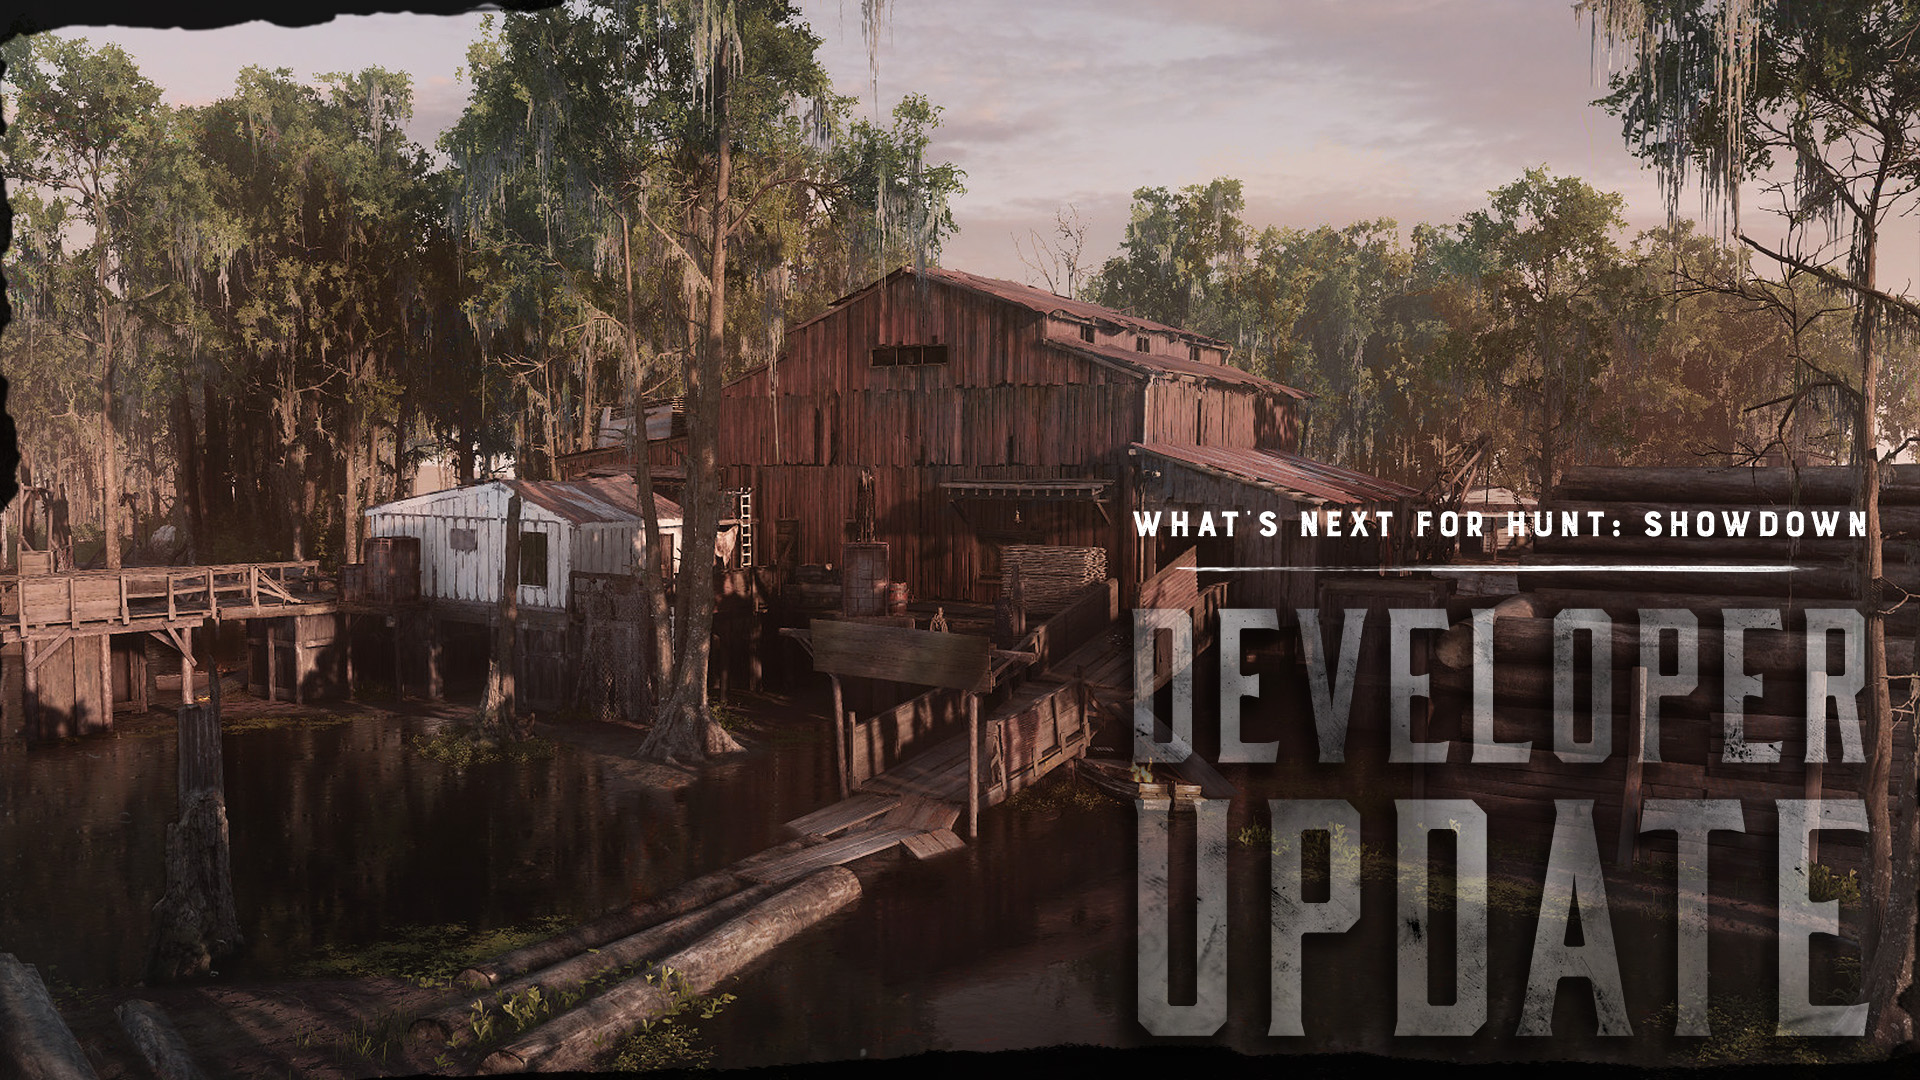 Hunt: Showdown Officially Launches Introducing New Content with Update 1.0  - mxdwn Games